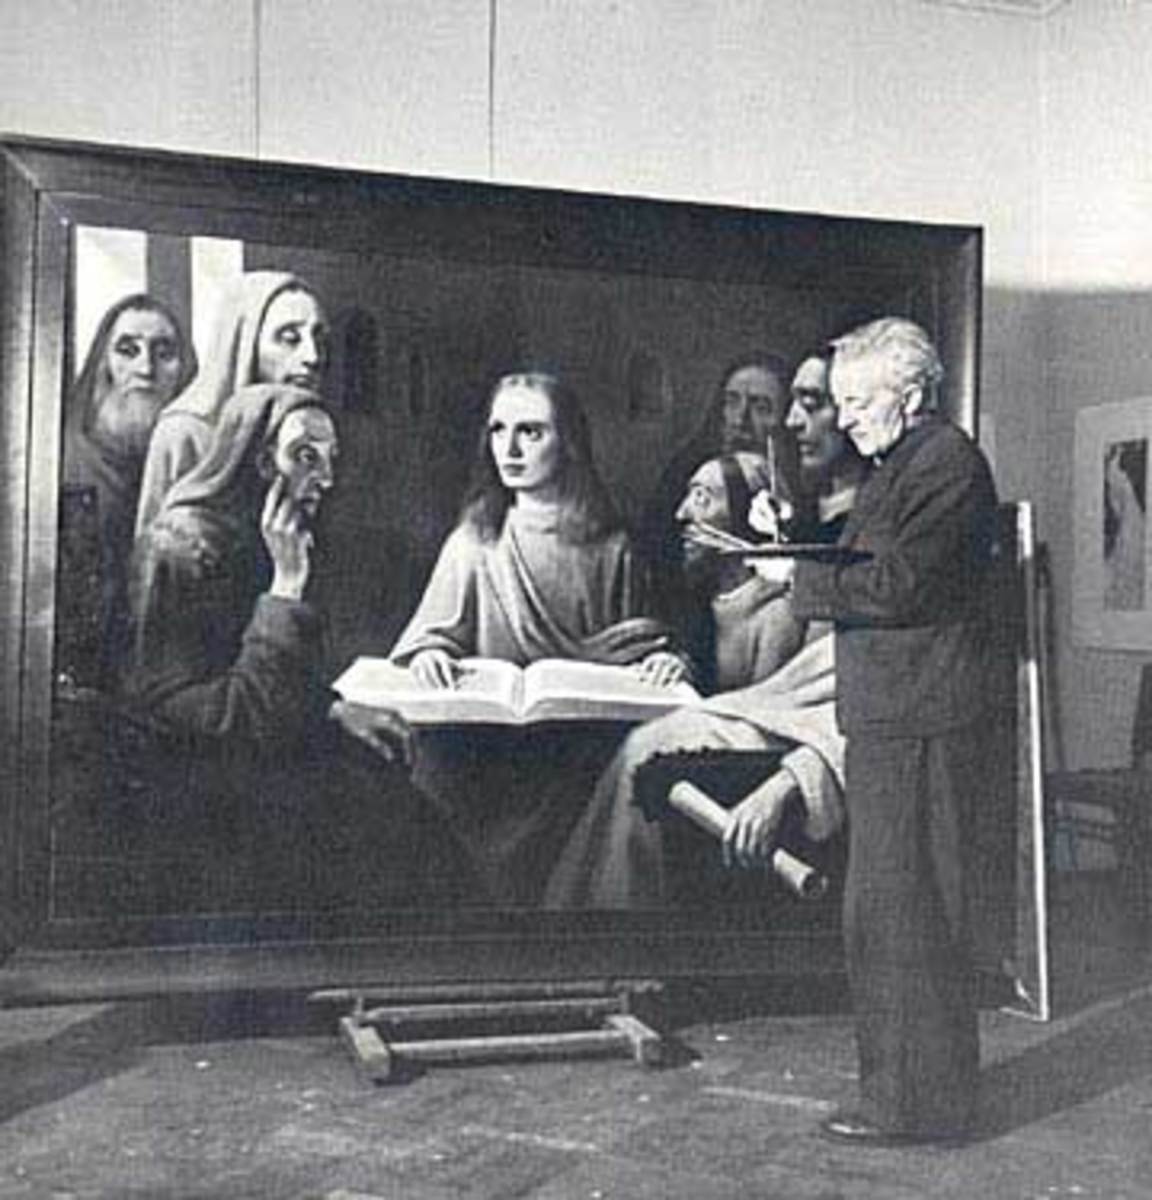 Van Meegeren is demonstrating his forgery skills to a group of art experts.